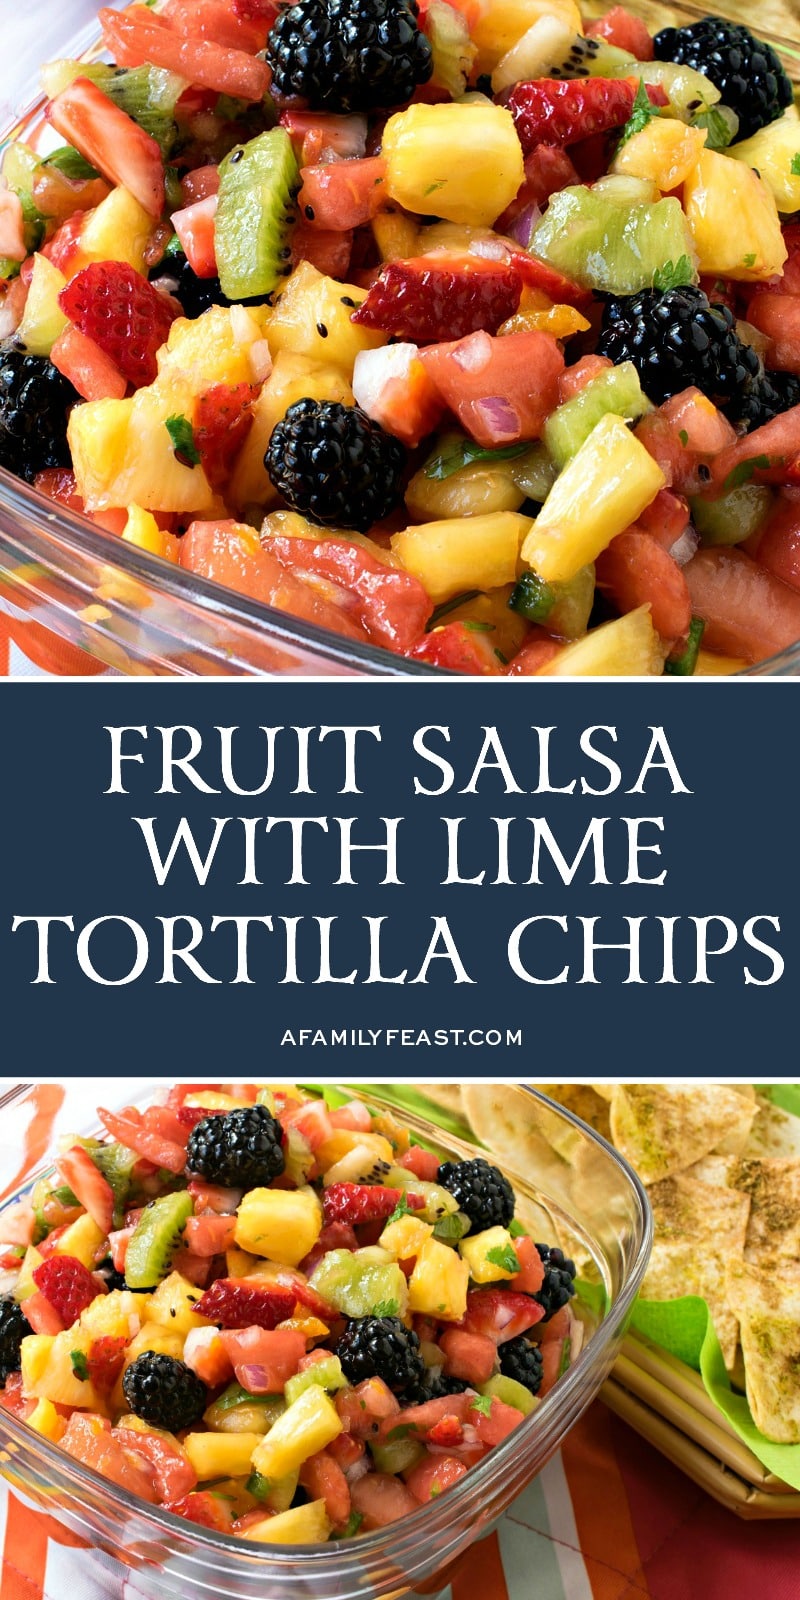 This delicious Fruit Salsa with Lime Tortilla Chips is a sweet and healthy snack that everyone will love!